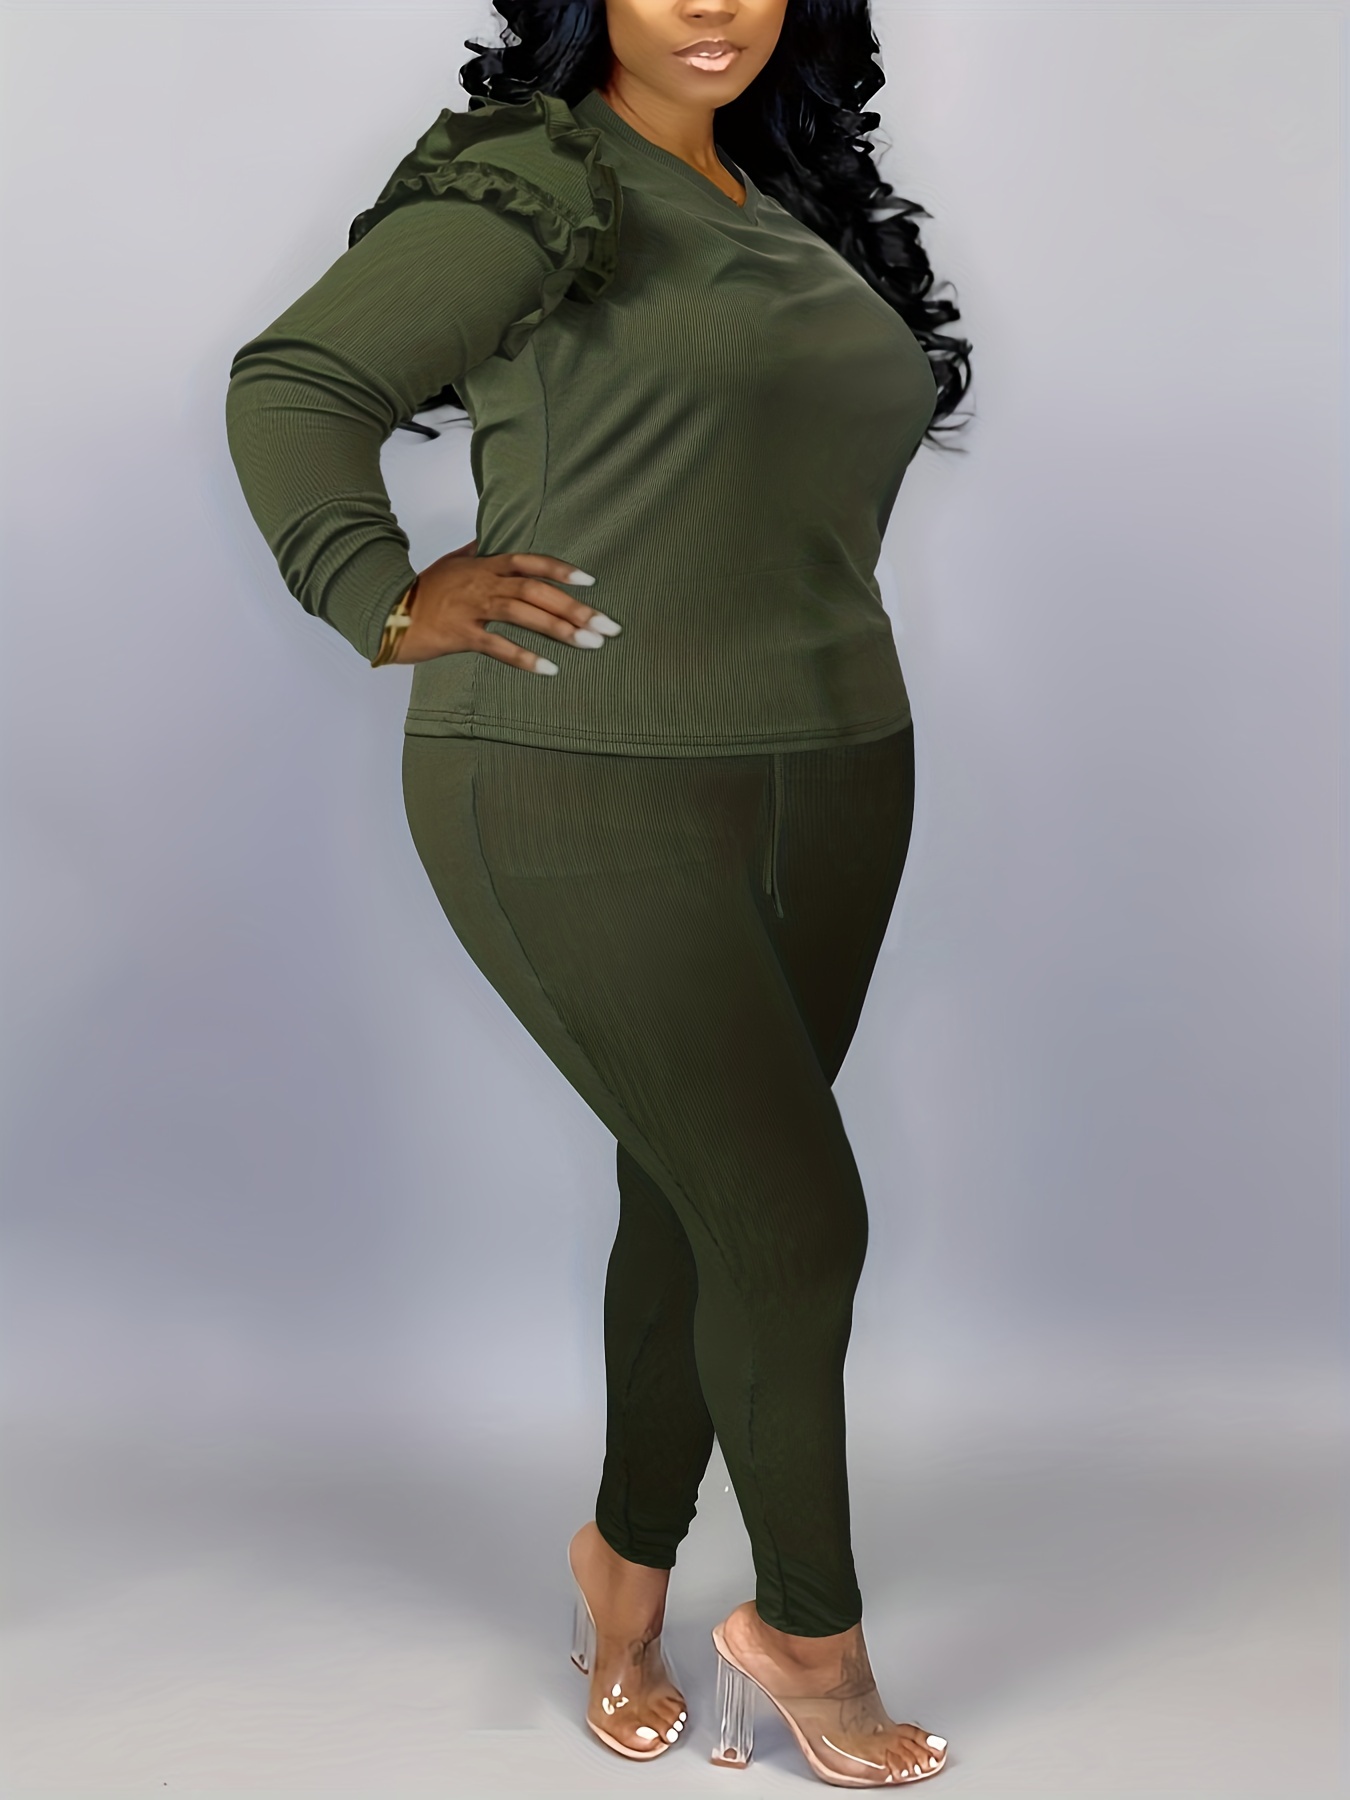 Plus Size Casual Outfits Two Piece Set, Women's Plus Solid Ribbed Lettuce  Trim Long Sleeve V Neck Top & Leggings Outfits 2 Piece Set